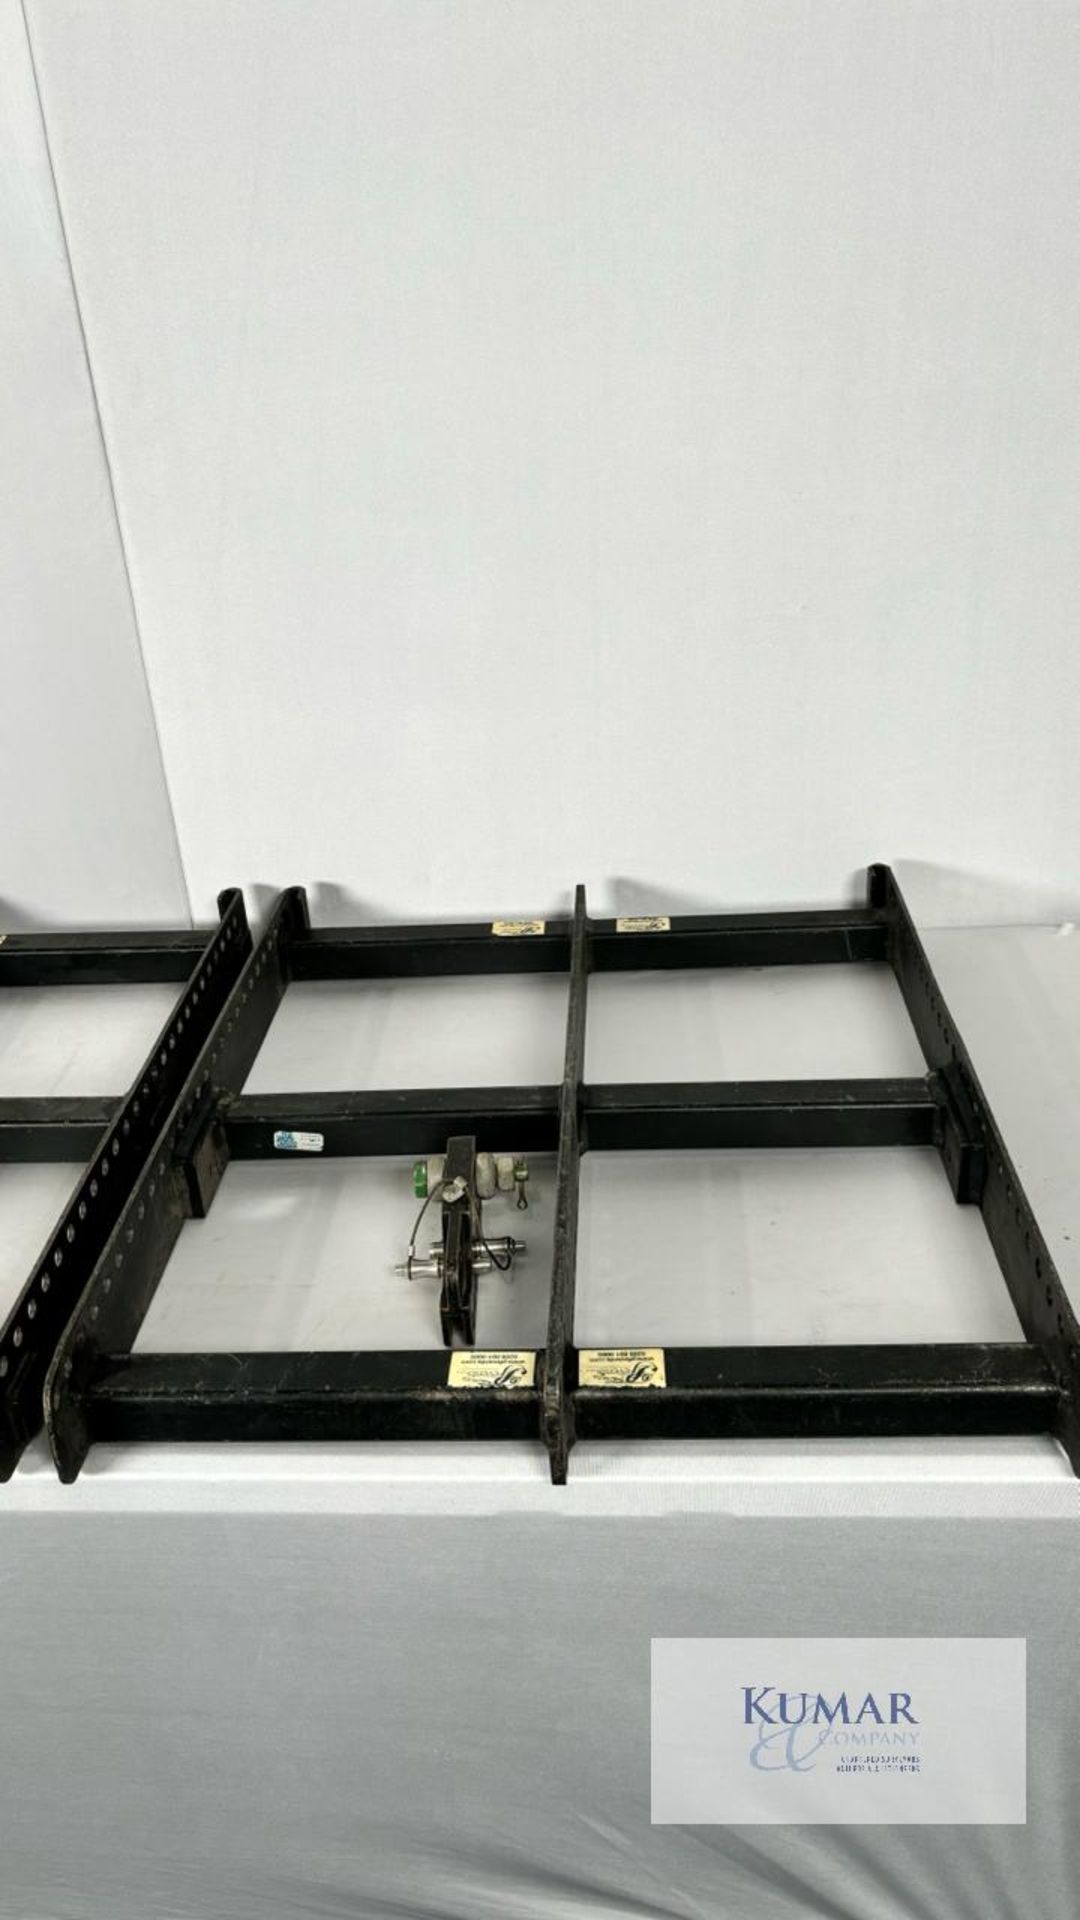 2 x D&B Q1 Flying Frames with D&B load adaptors Function condition - frame and load adaptors - Image 3 of 9